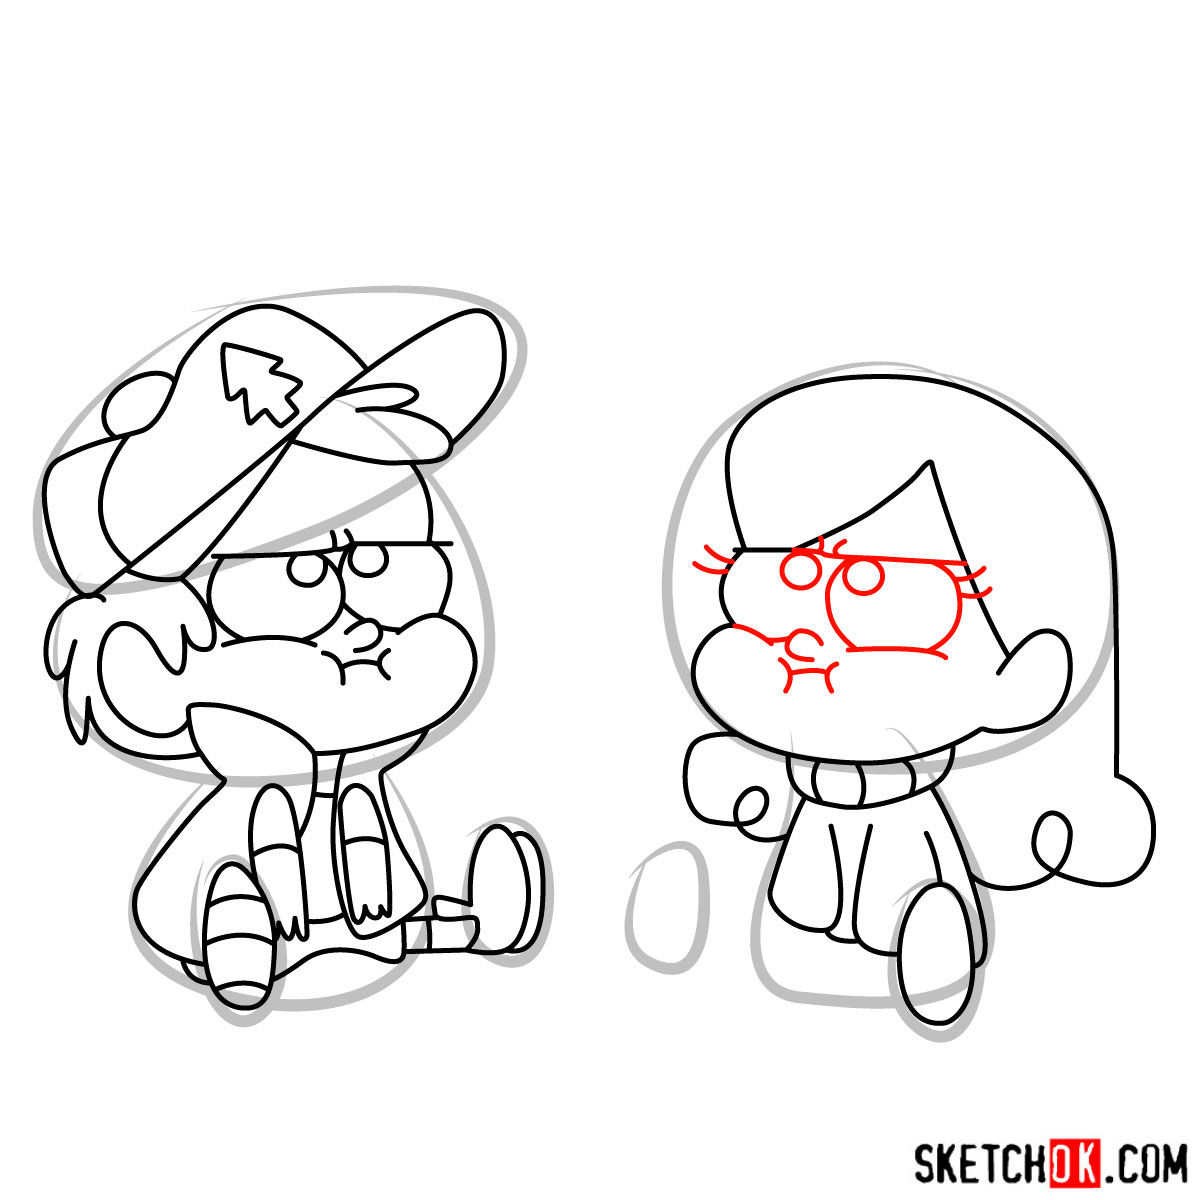 How to draw Dipper and Mabel Pines chibi style - step 12